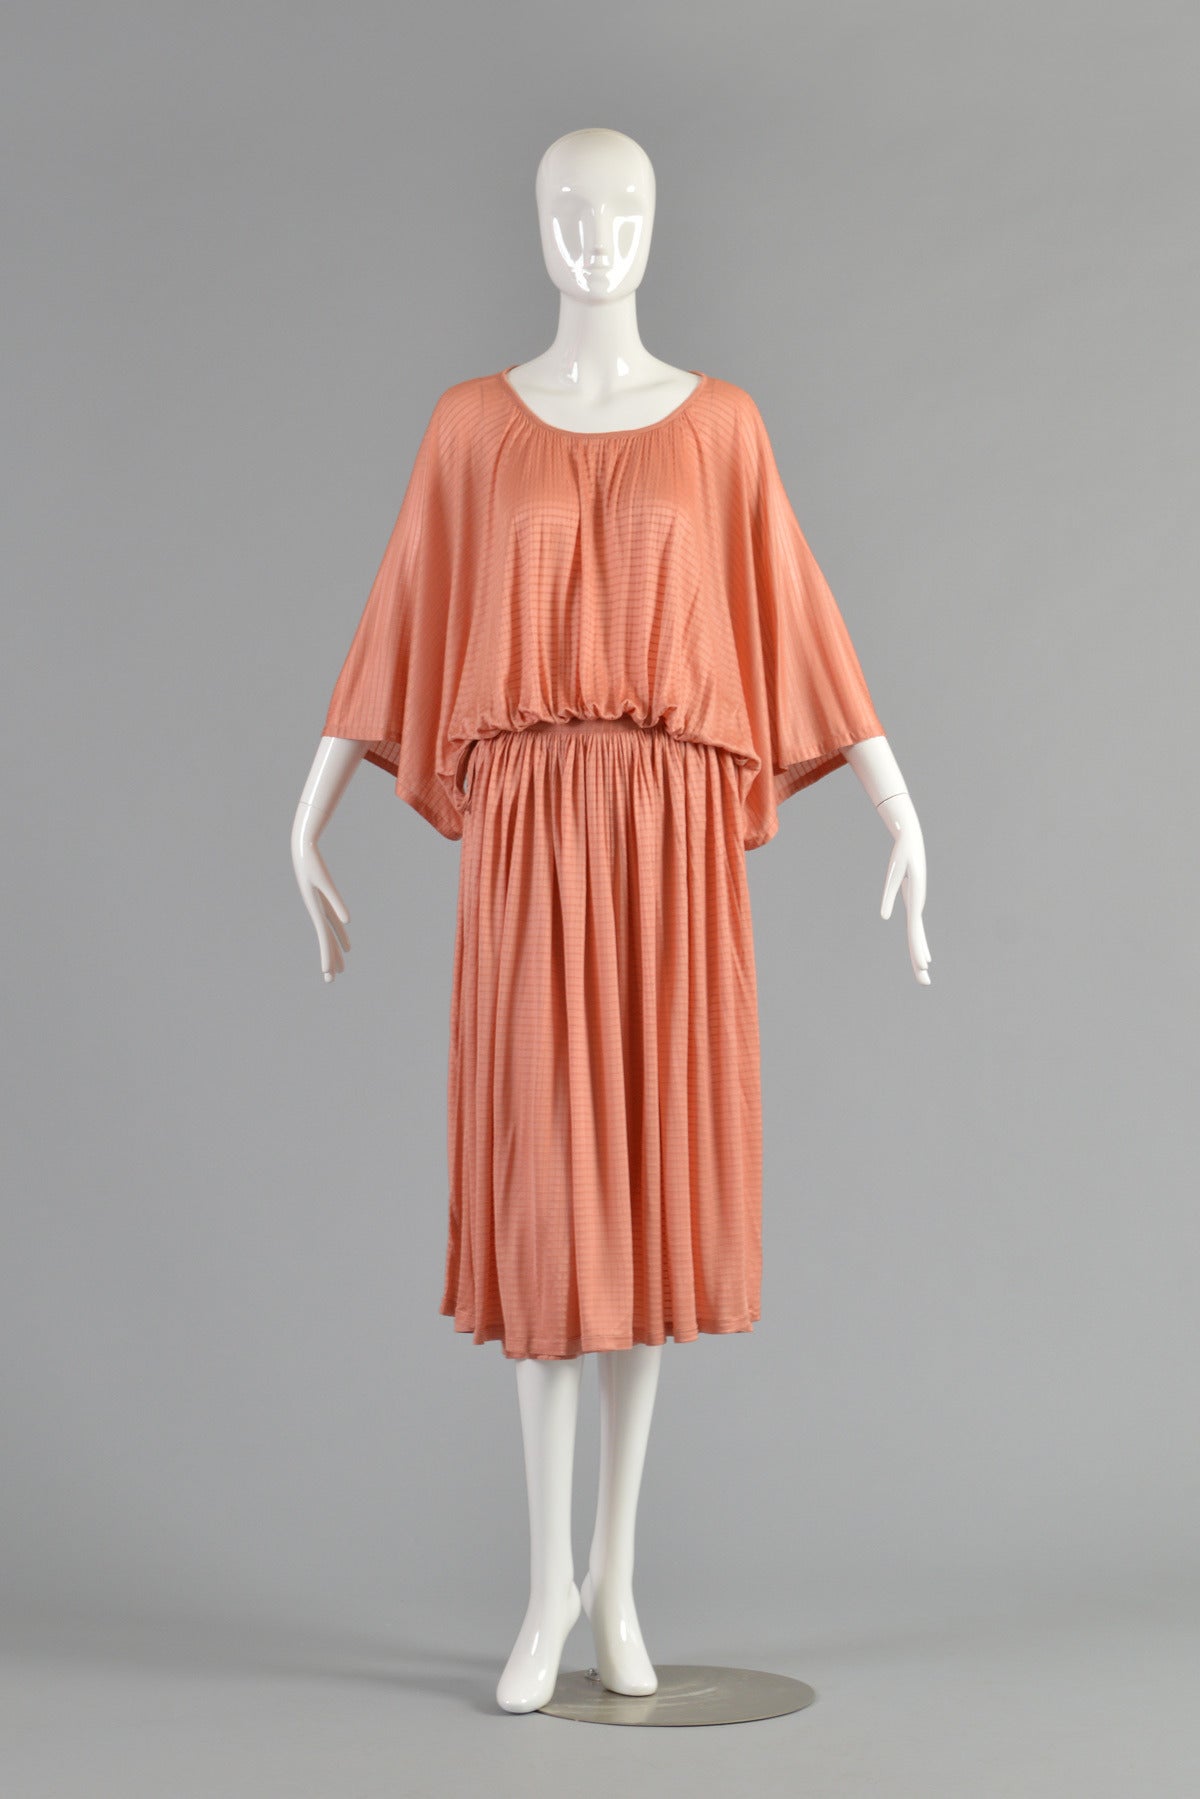 Lovely 1970s 2-piece silk ensemble by Missoni. The BEST color of the season! Ultra draped silk tunic too with kimono sleeves features a gathered waist and open sided attached skirt that ties on each side. The entire top portion sits atop a simple